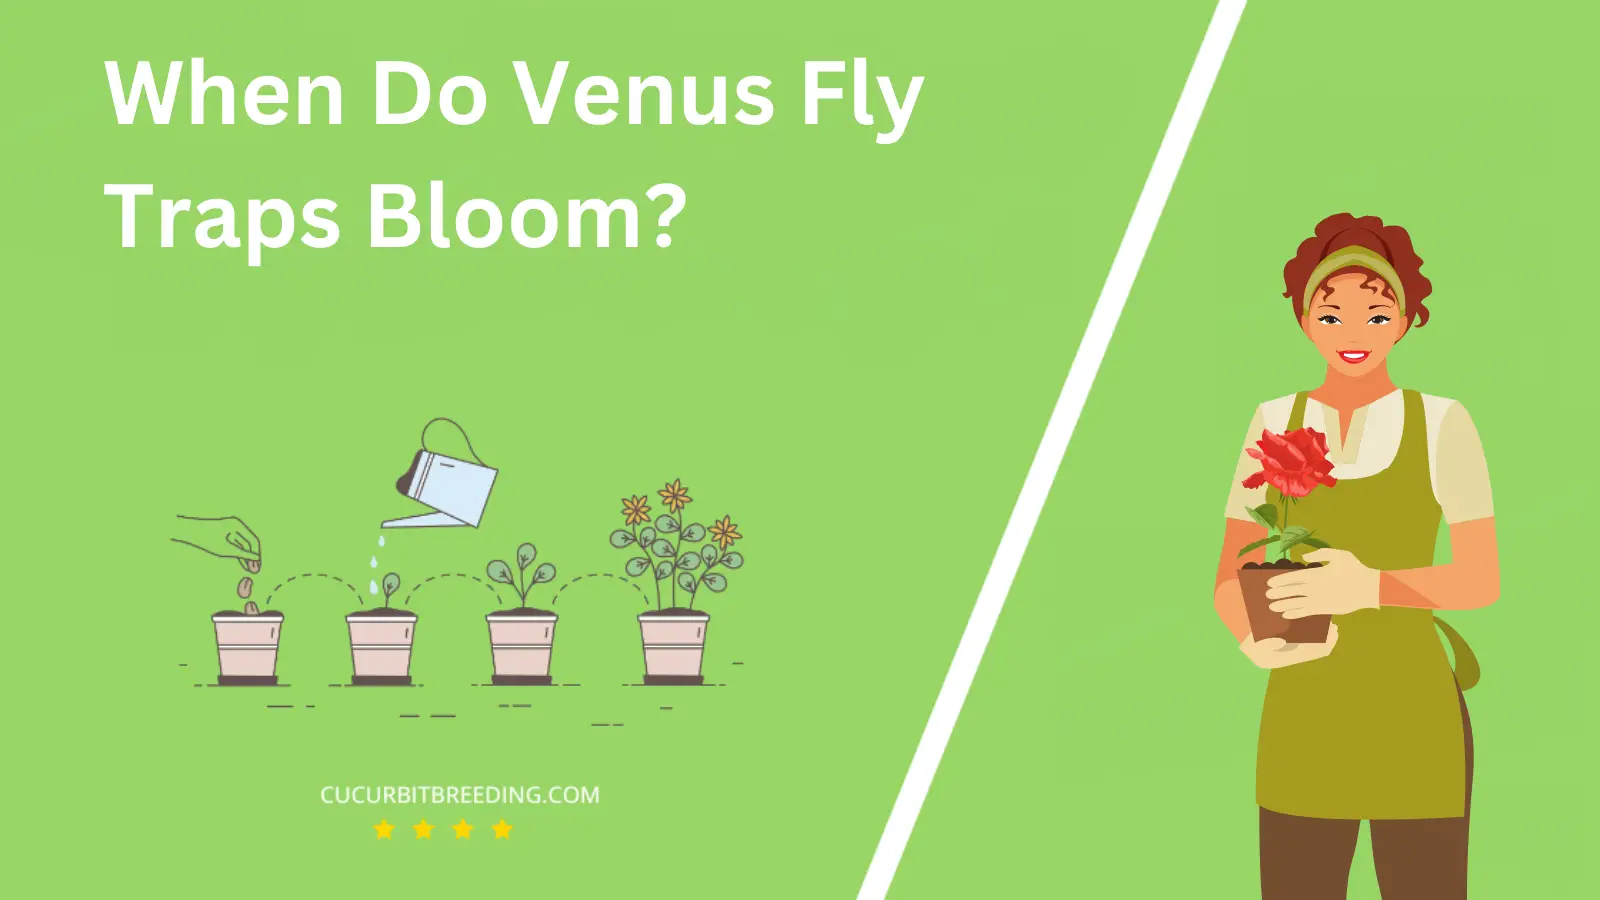 When Do Venus Fly Traps Bloom?